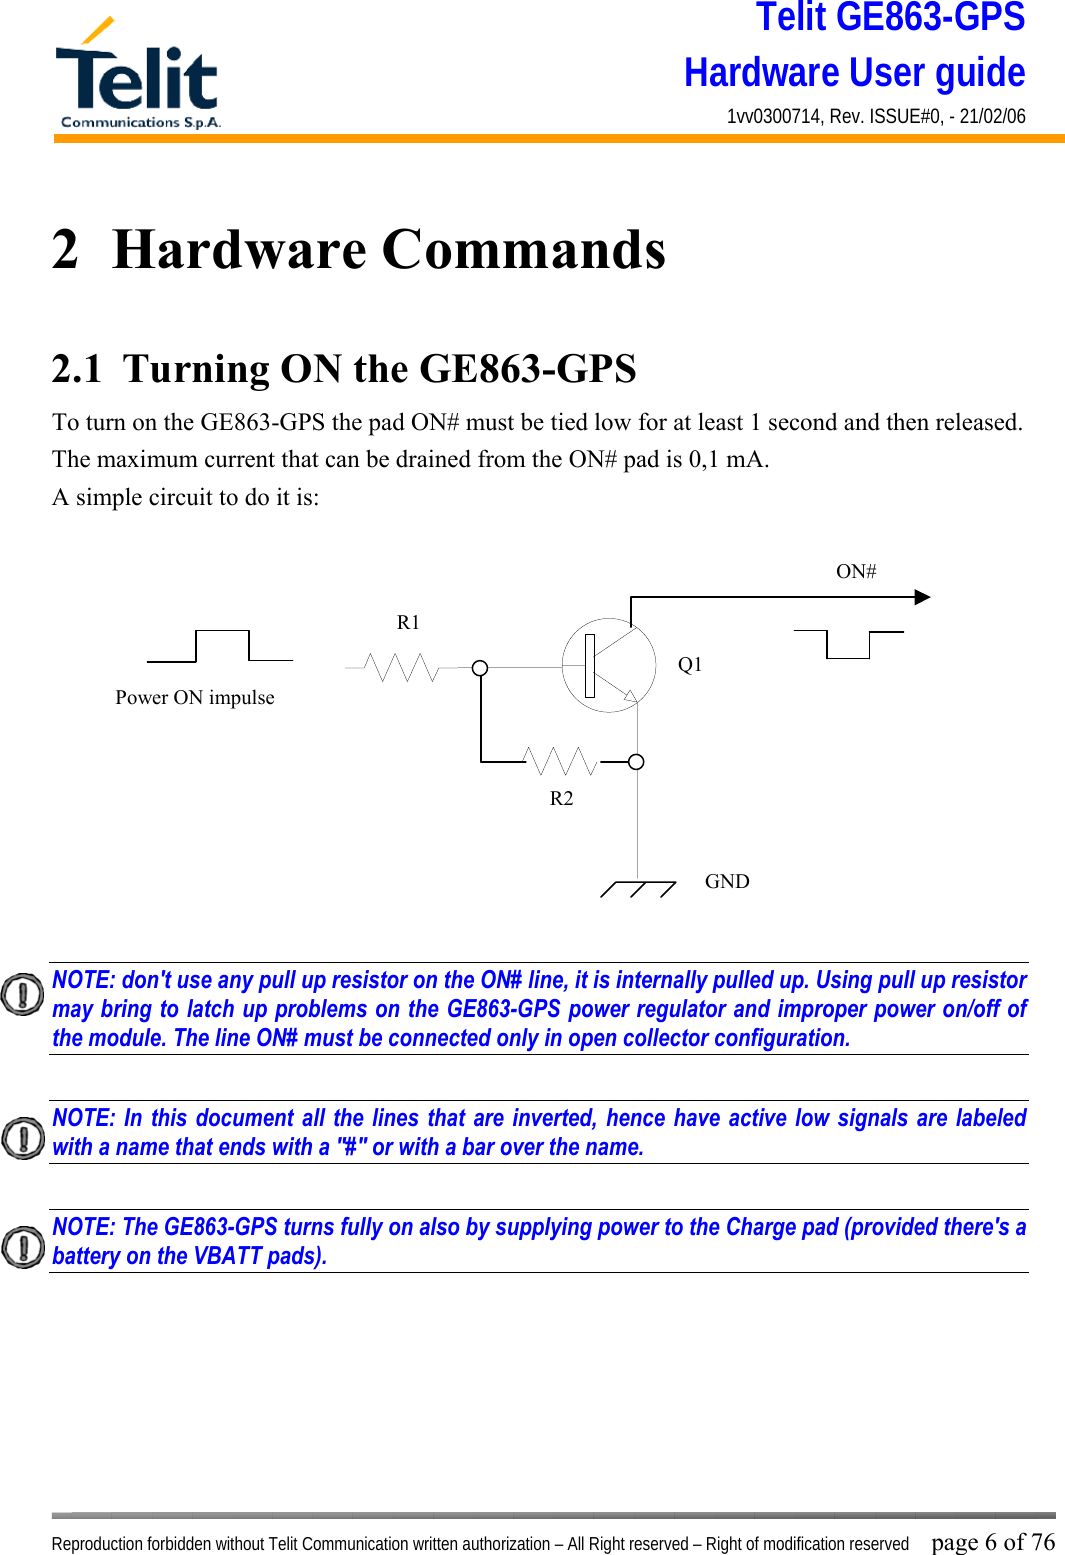 Telit GE863-GPS Hardware User guide 1vv0300714, Rev. ISSUE#0, - 21/02/06    Reproduction forbidden without Telit Communication written authorization – All Right reserved – Right of modification reserved page 6 of 76 2  Hardware Commands 2.1  Turning ON the GE863-GPS To turn on the GE863-GPS the pad ON# must be tied low for at least 1 second and then released. The maximum current that can be drained from the ON# pad is 0,1 mA. A simple circuit to do it is:   NOTE: don&apos;t use any pull up resistor on the ON# line, it is internally pulled up. Using pull up resistor may bring to latch up problems on the GE863-GPS power regulator and improper power on/off of the module. The line ON# must be connected only in open collector configuration.  NOTE: In this document all the lines that are inverted, hence have active low signals are labeled with a name that ends with a &quot;#&quot; or with a bar over the name.  NOTE: The GE863-GPS turns fully on also by supplying power to the Charge pad (provided there&apos;s a battery on the VBATT pads).        ON#Power ON impulse  GNDR1R2Q1